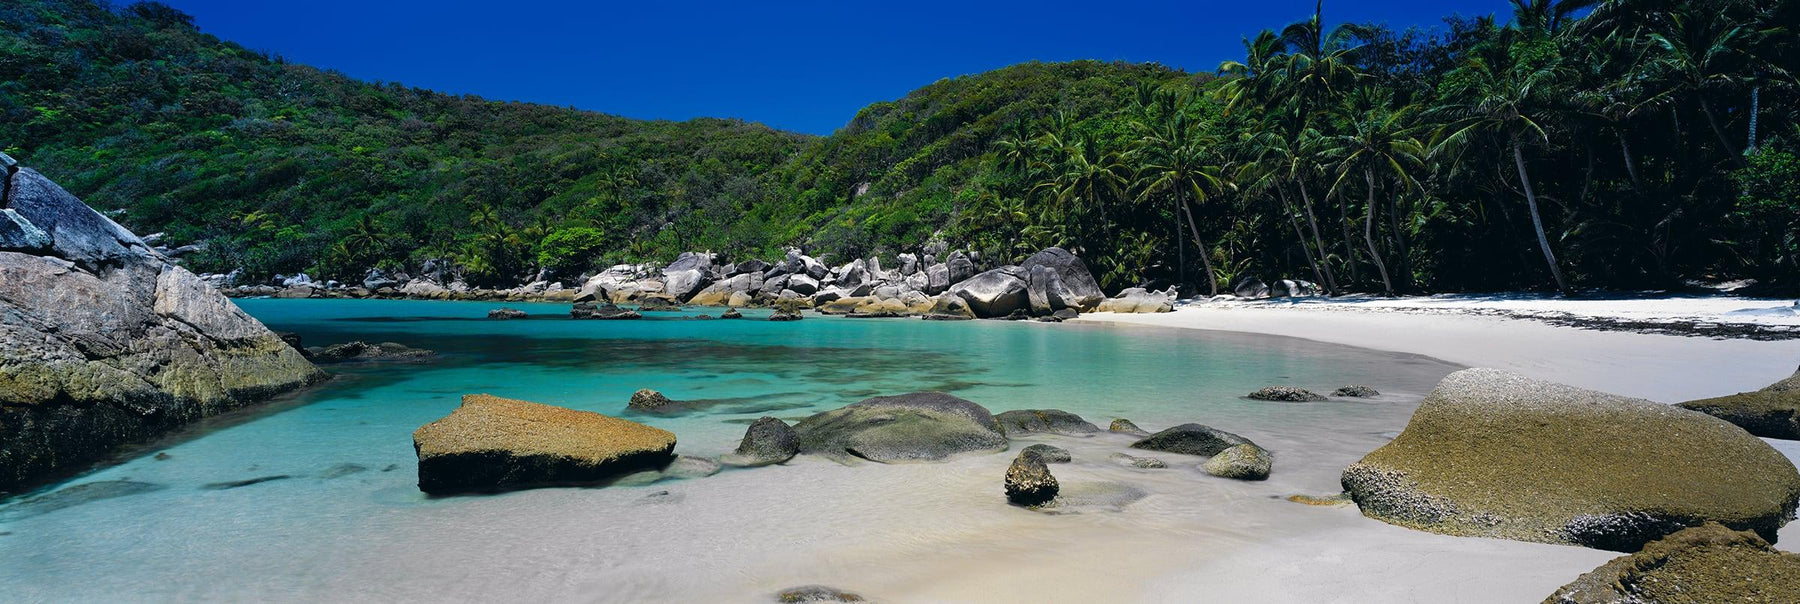 Lagoon filled with boulders along a palm tree filled beach at Bedarra Island Australia